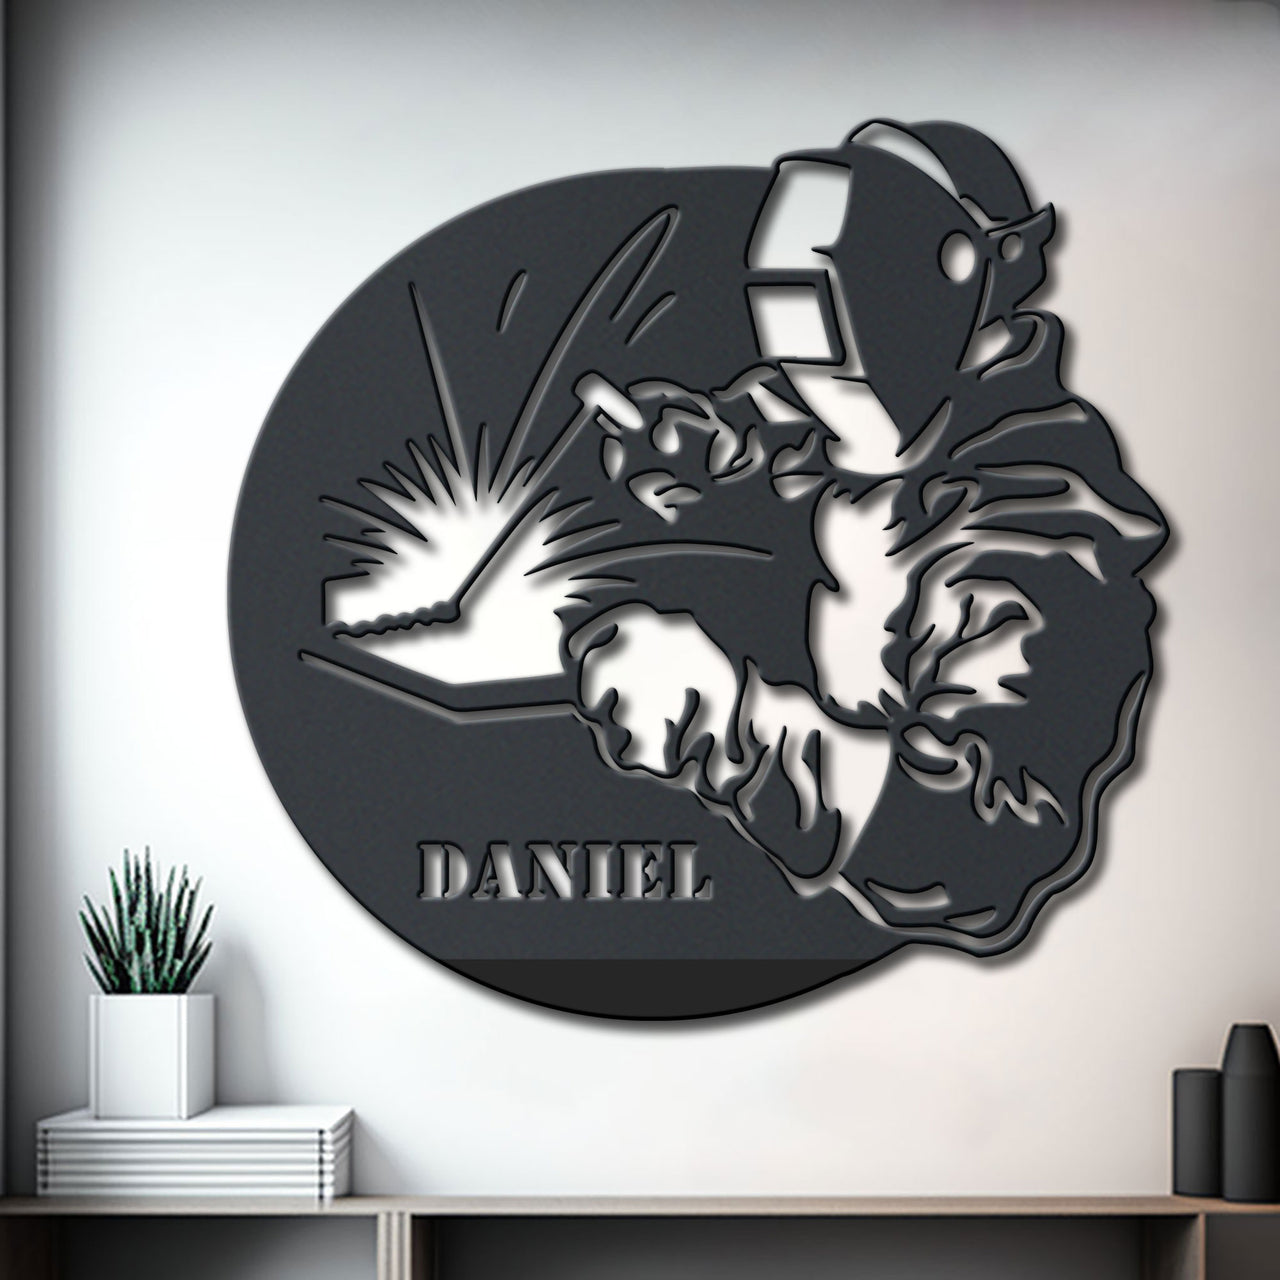 Welder Name Metal Wall Art Idea For Wall Decoration Personalized